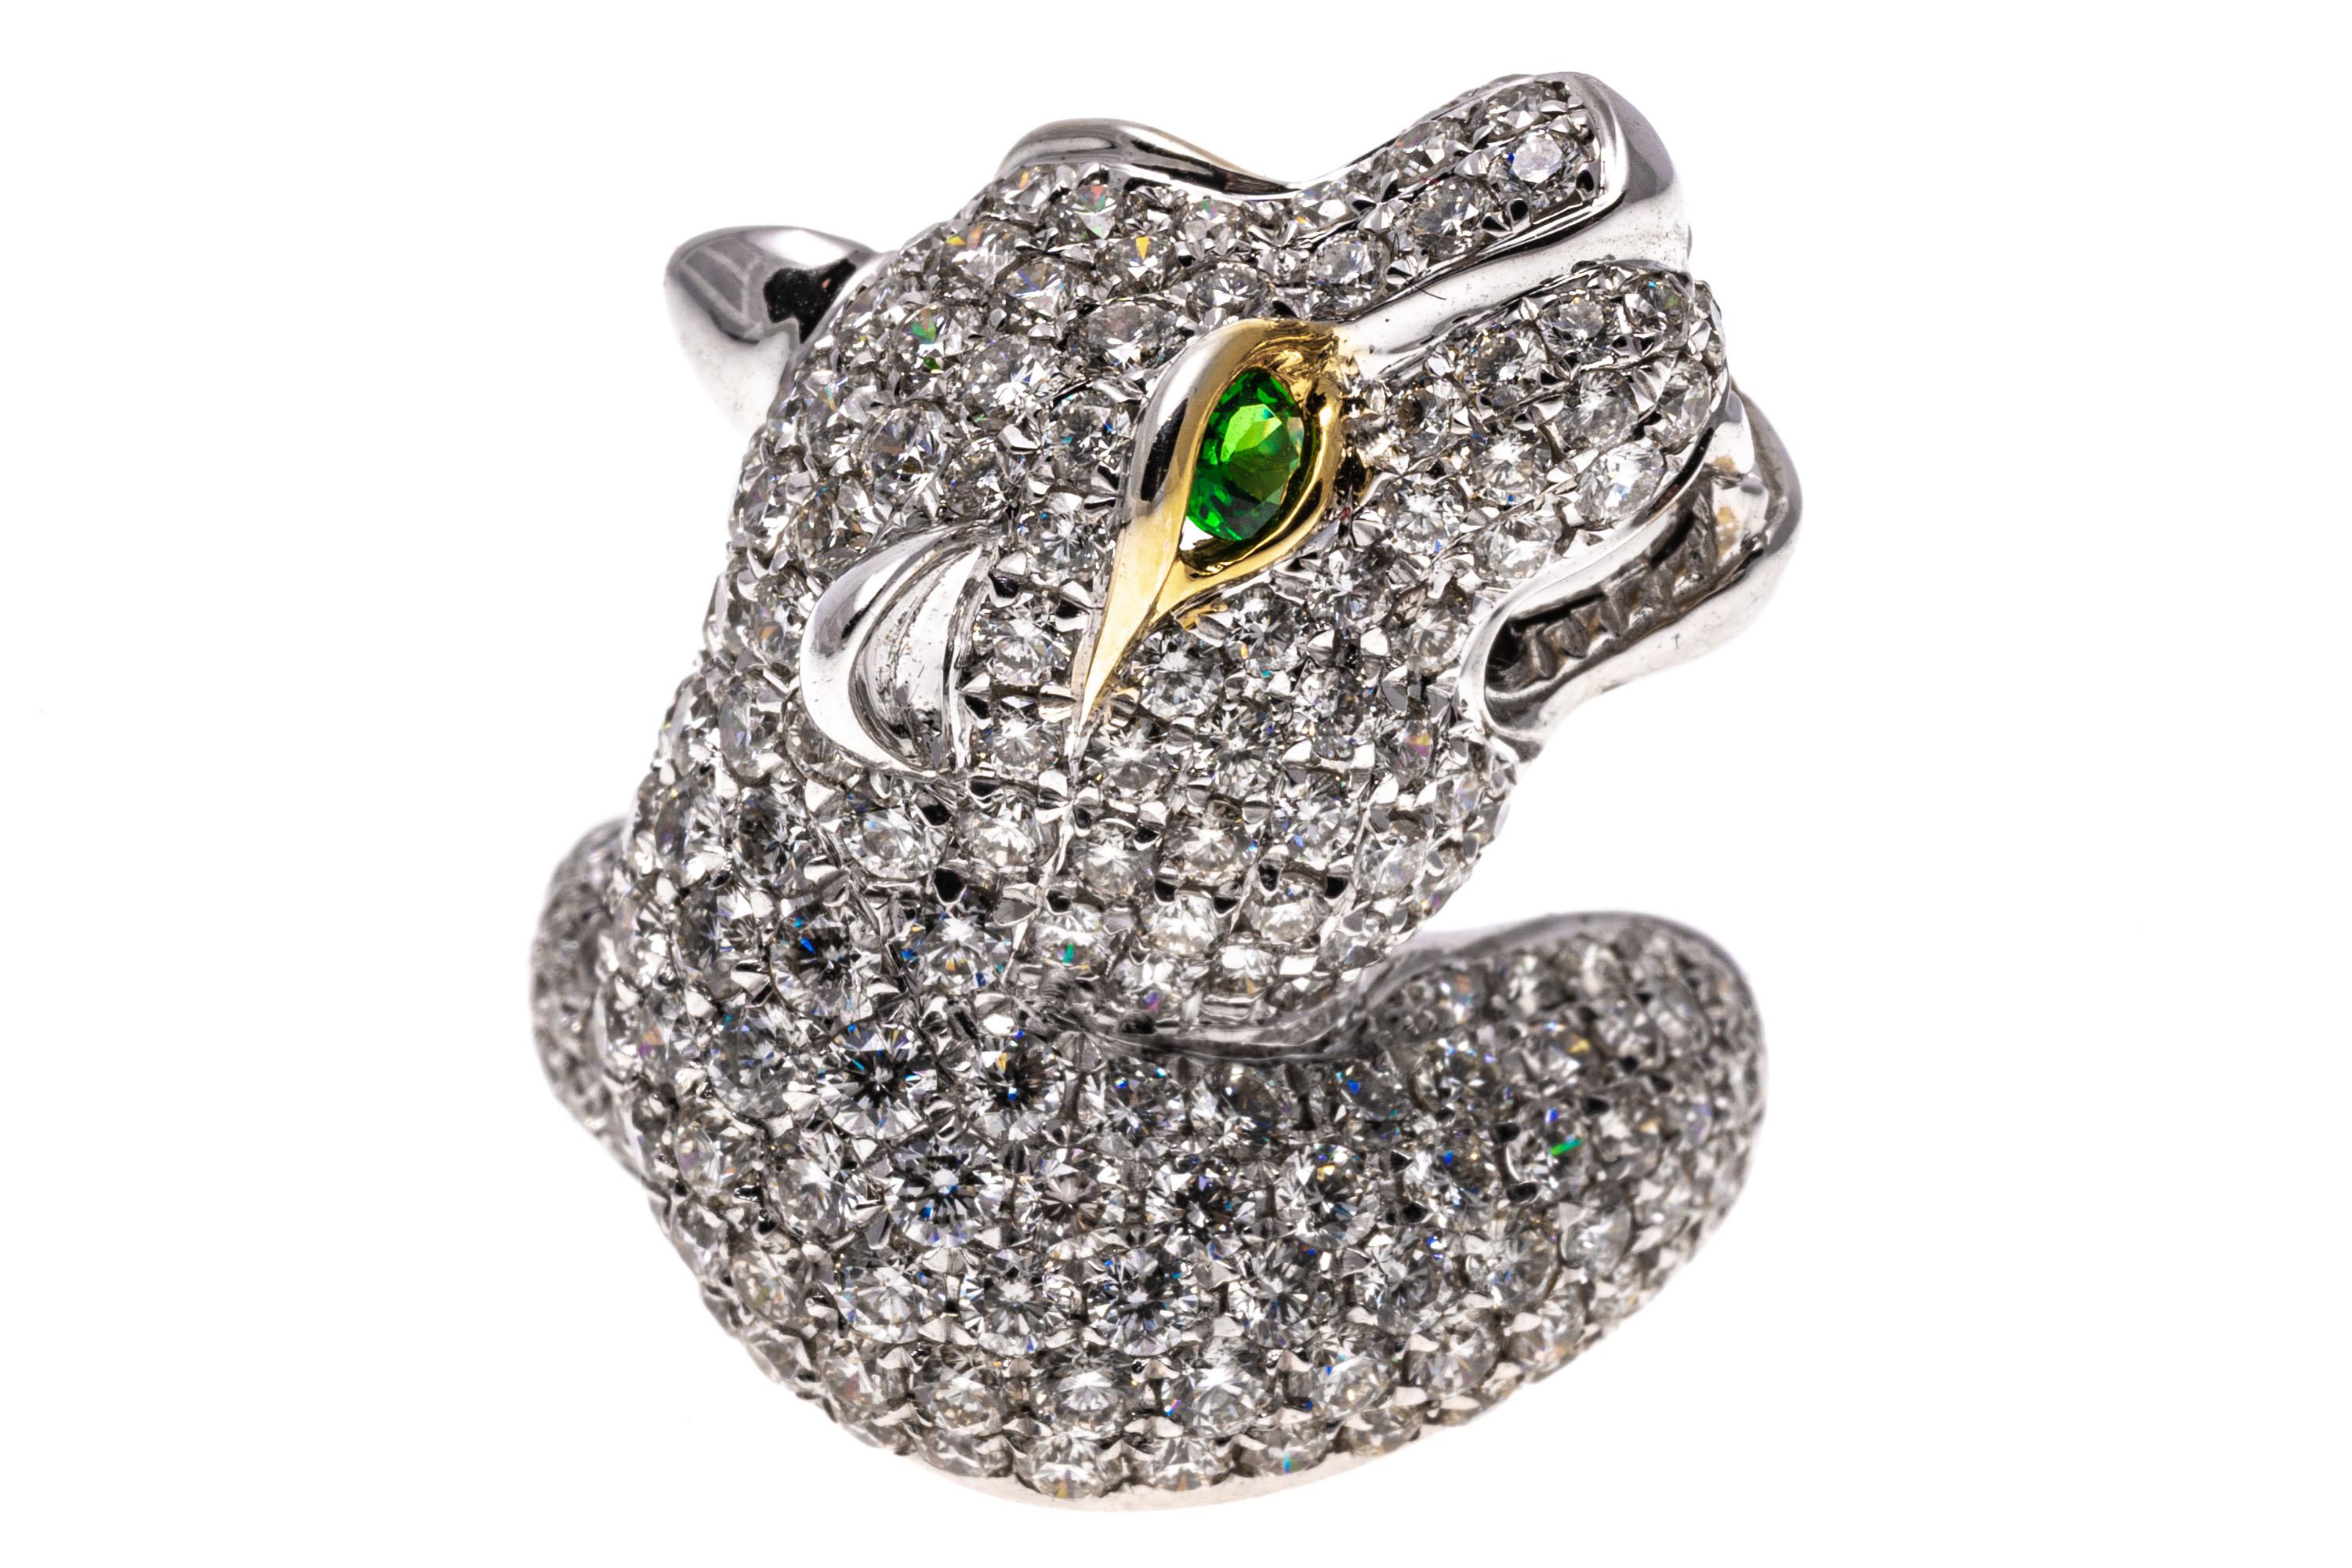 18k white gold ring. This gorgeous ring is a white gold, figural panther head motif, pave set with round faceted white diamonds, 2.76 TCW. The ring is finished by round faceted, bright green tsavorite garnet eyes, 0.26 TCW and a high polished